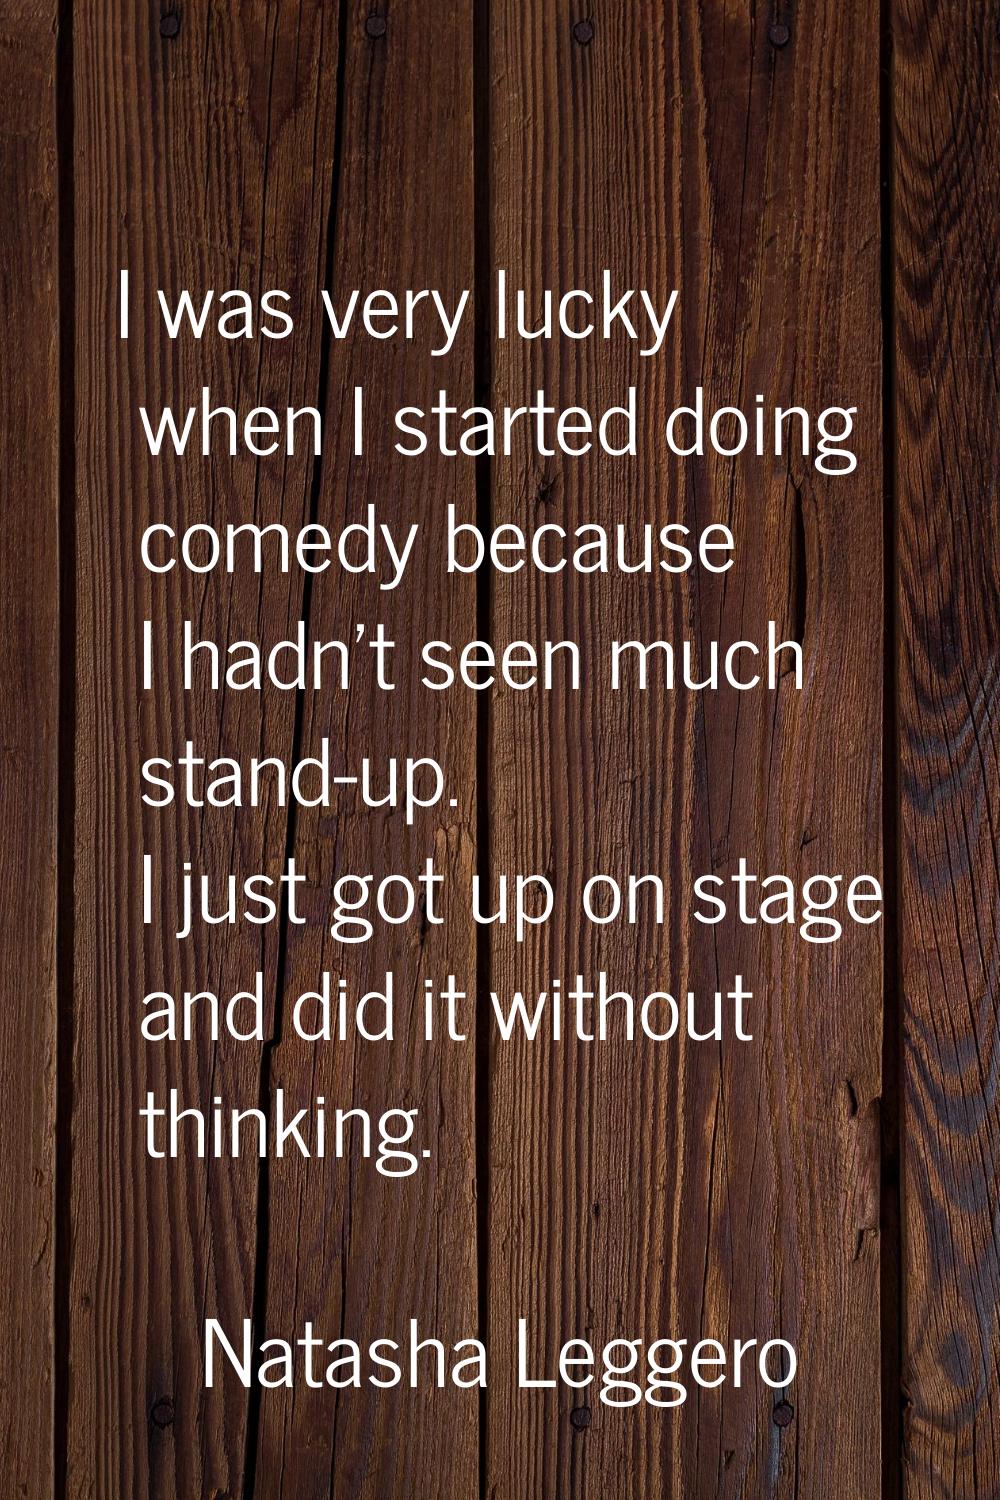 I was very lucky when I started doing comedy because I hadn't seen much stand-up. I just got up on 